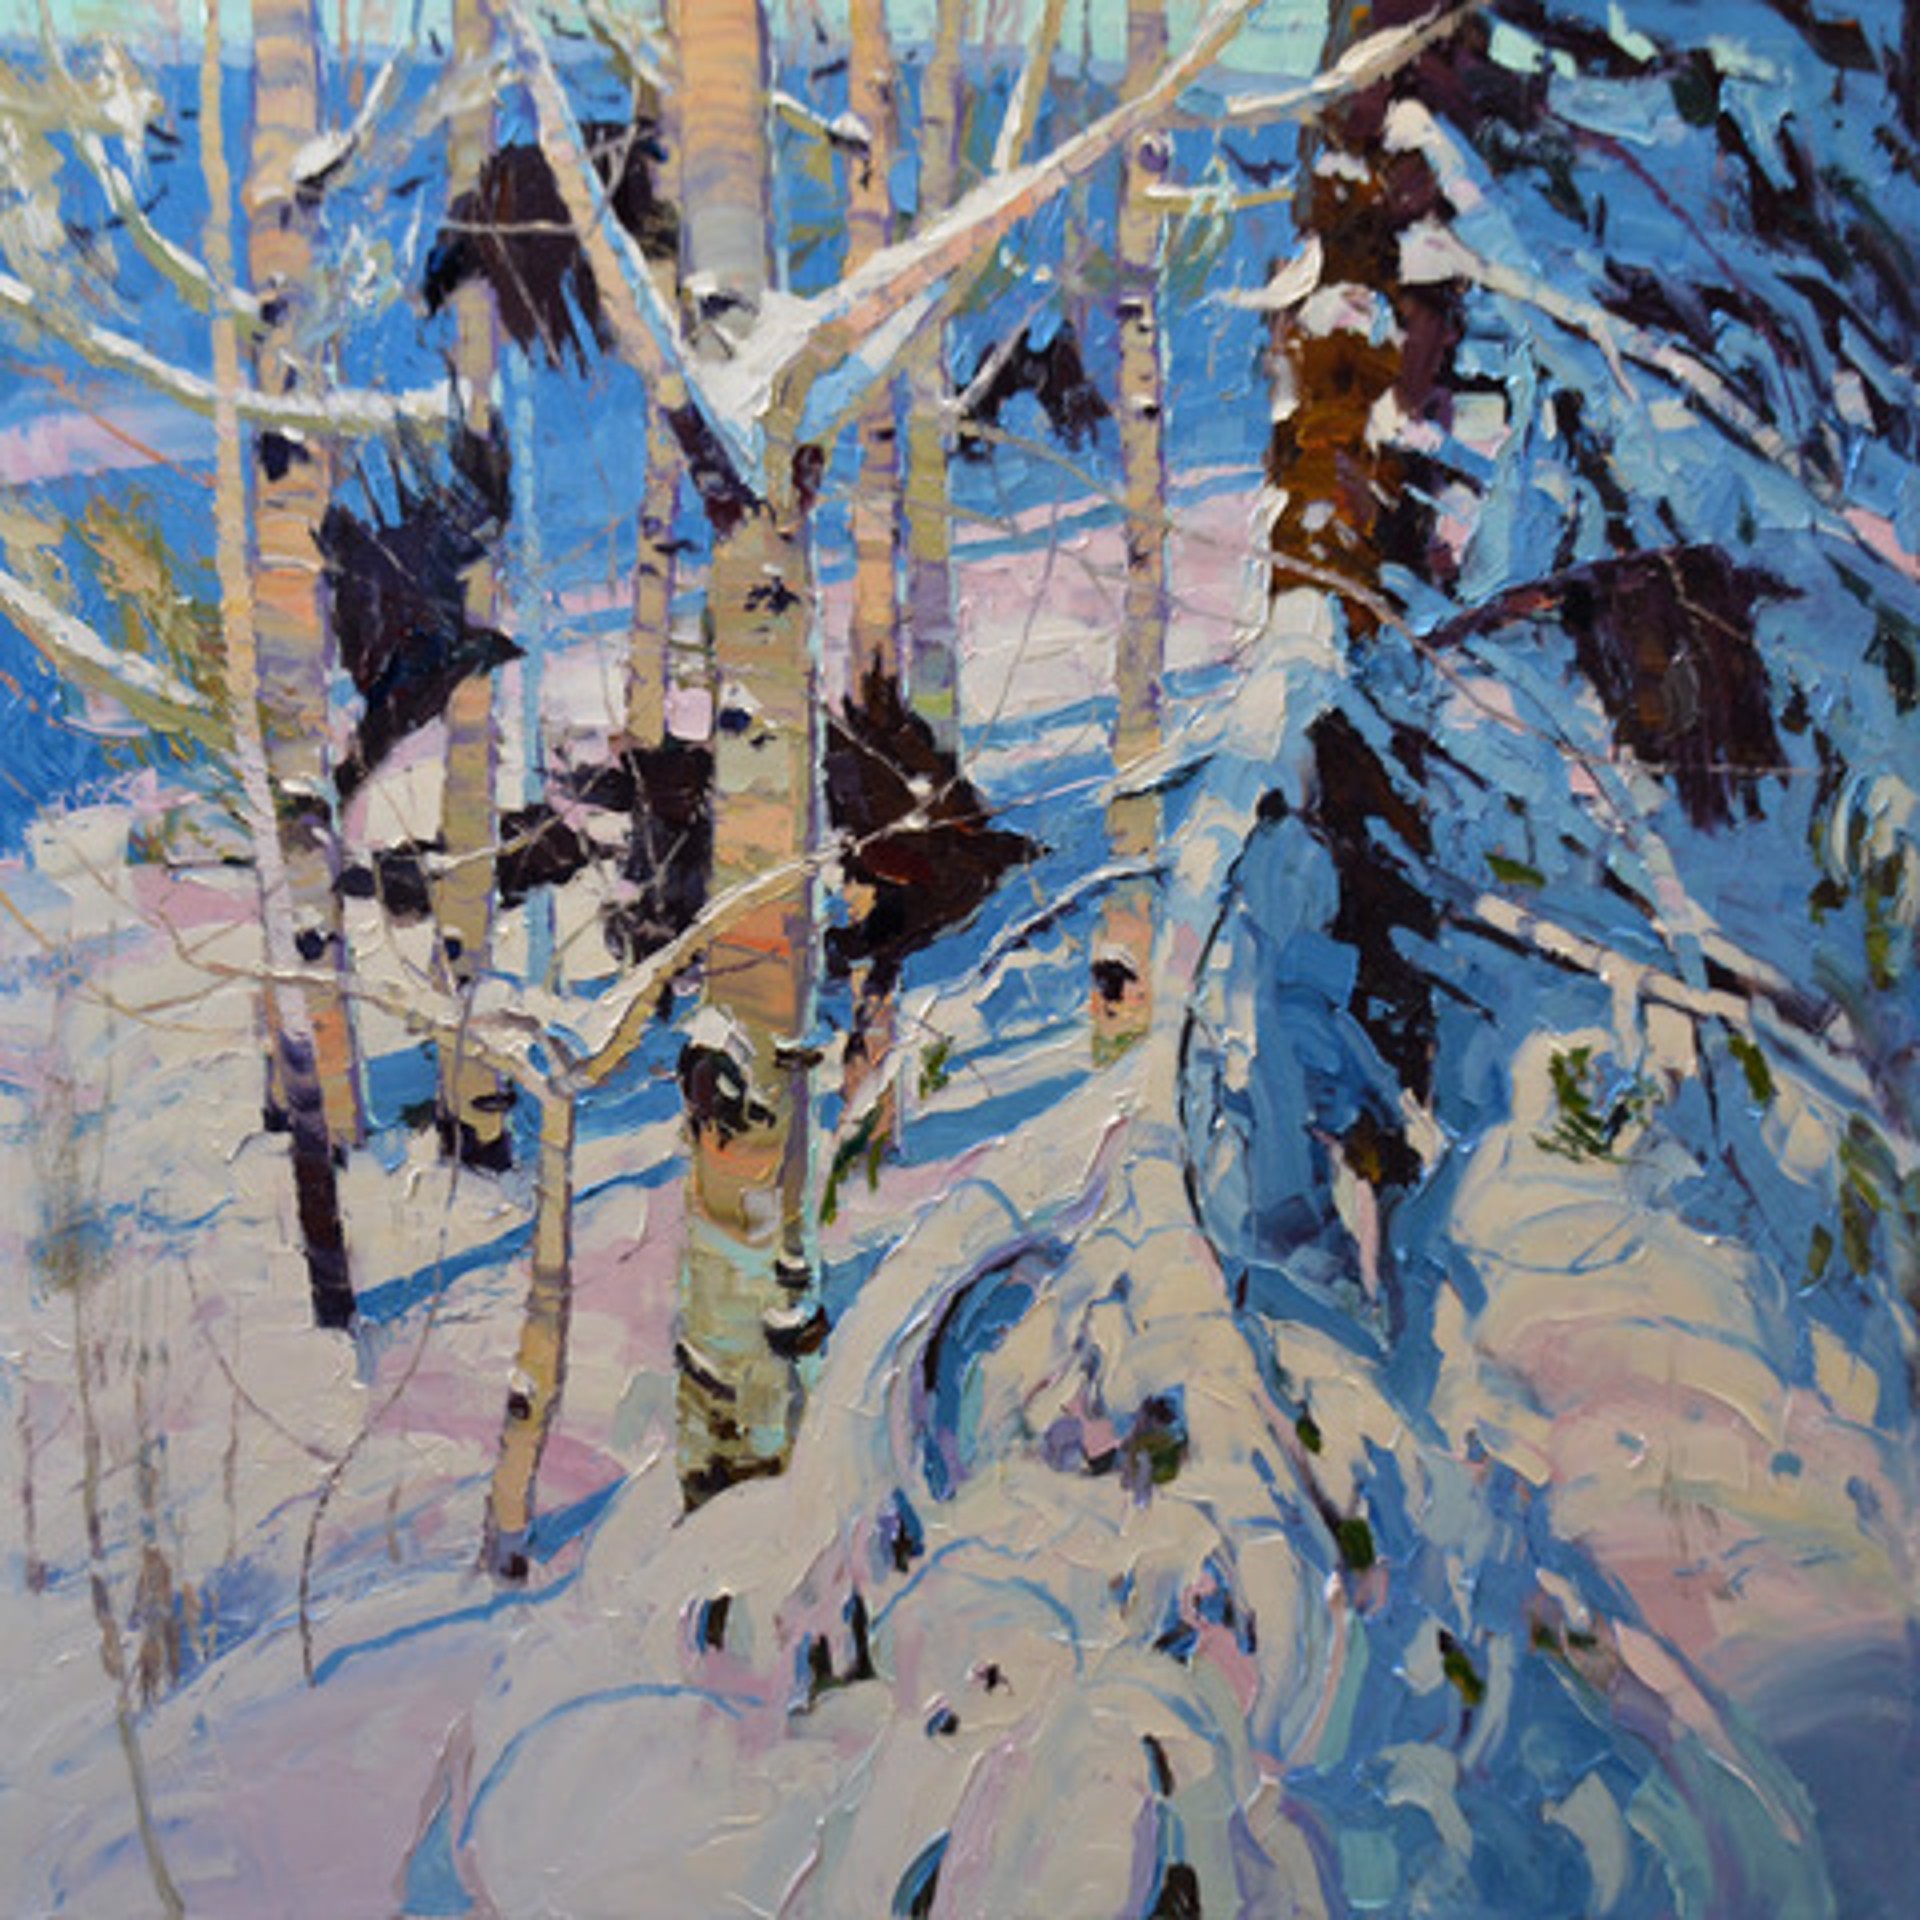 Original Oil Painting Of A Snowy Aspen Forest With Crows Taking Off In A Colorful Contemporary Style